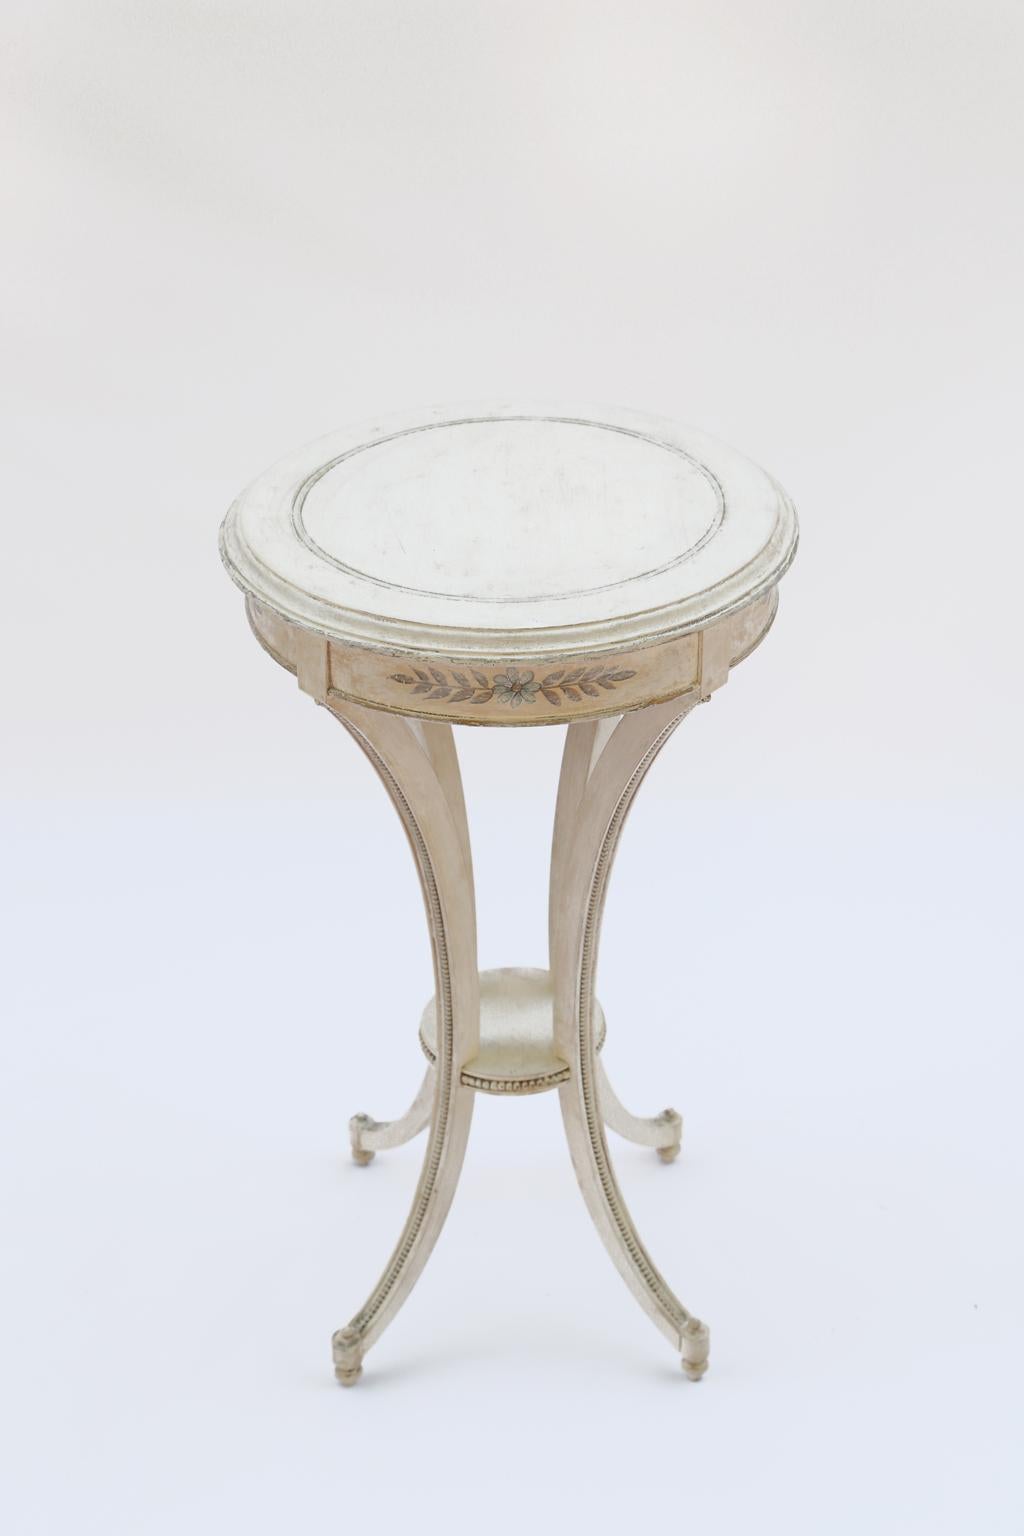 Neoclassical Painted Candle Stand Accent Table